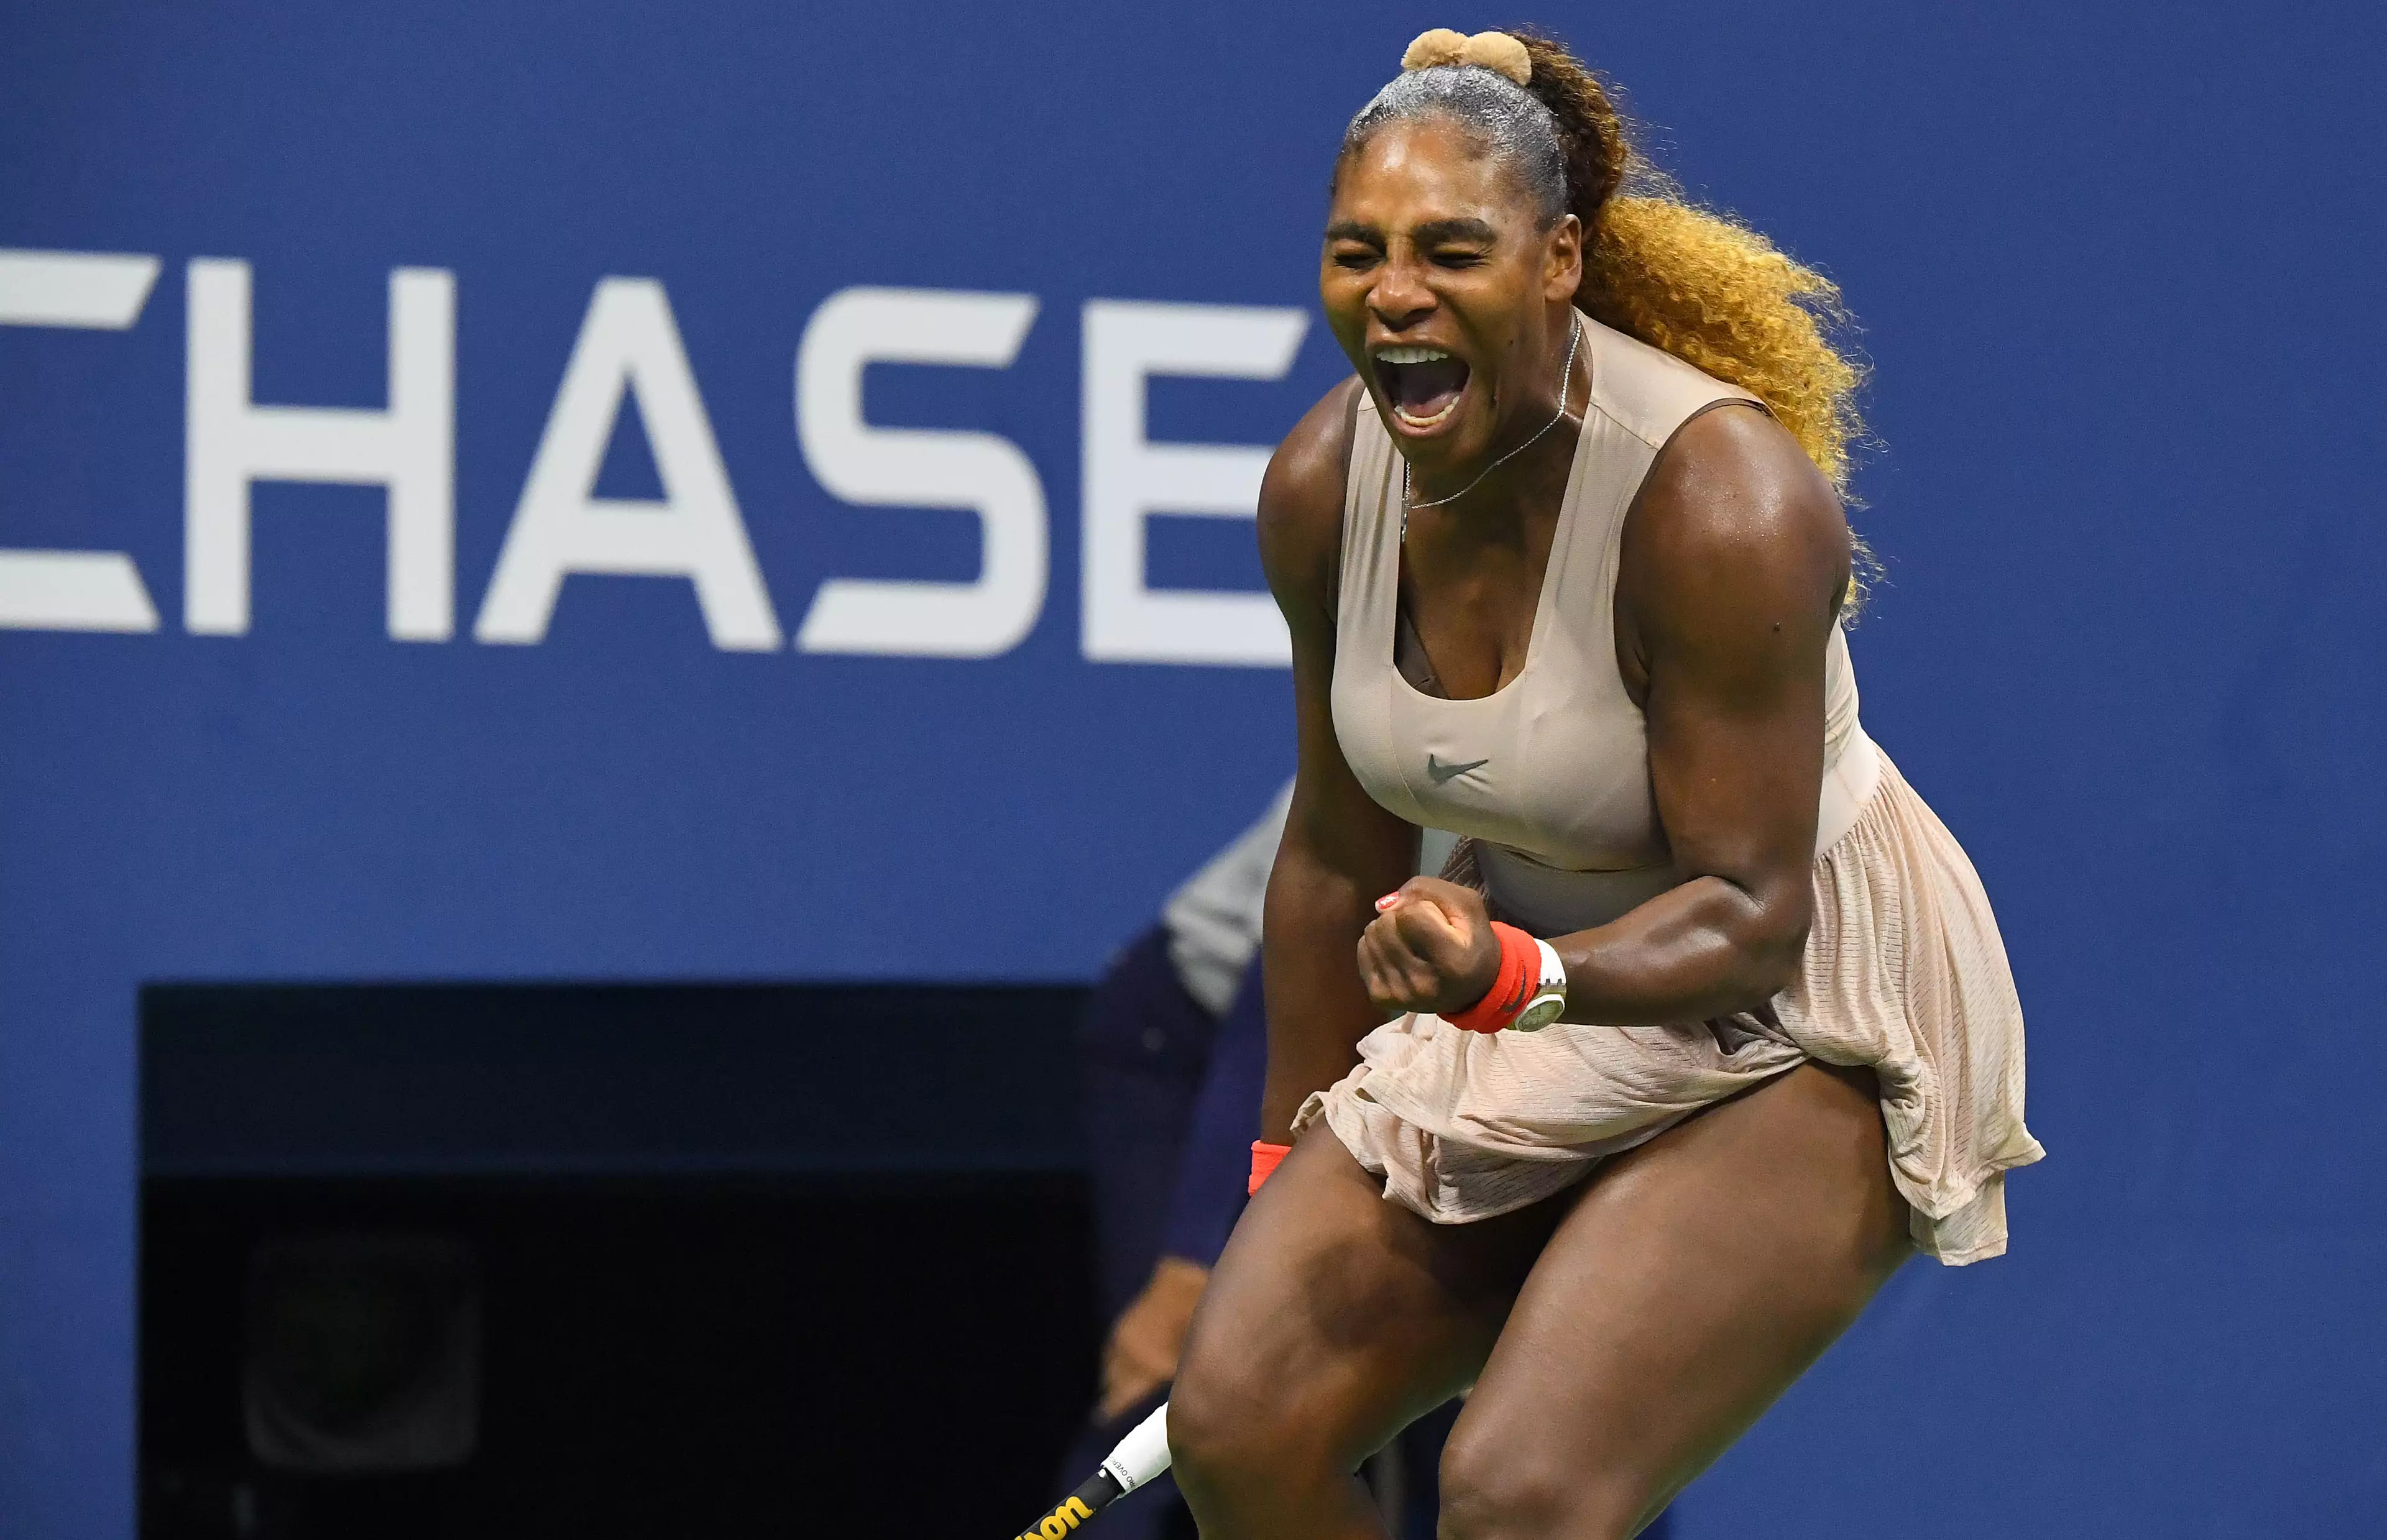 Serena Williams at the US Open.